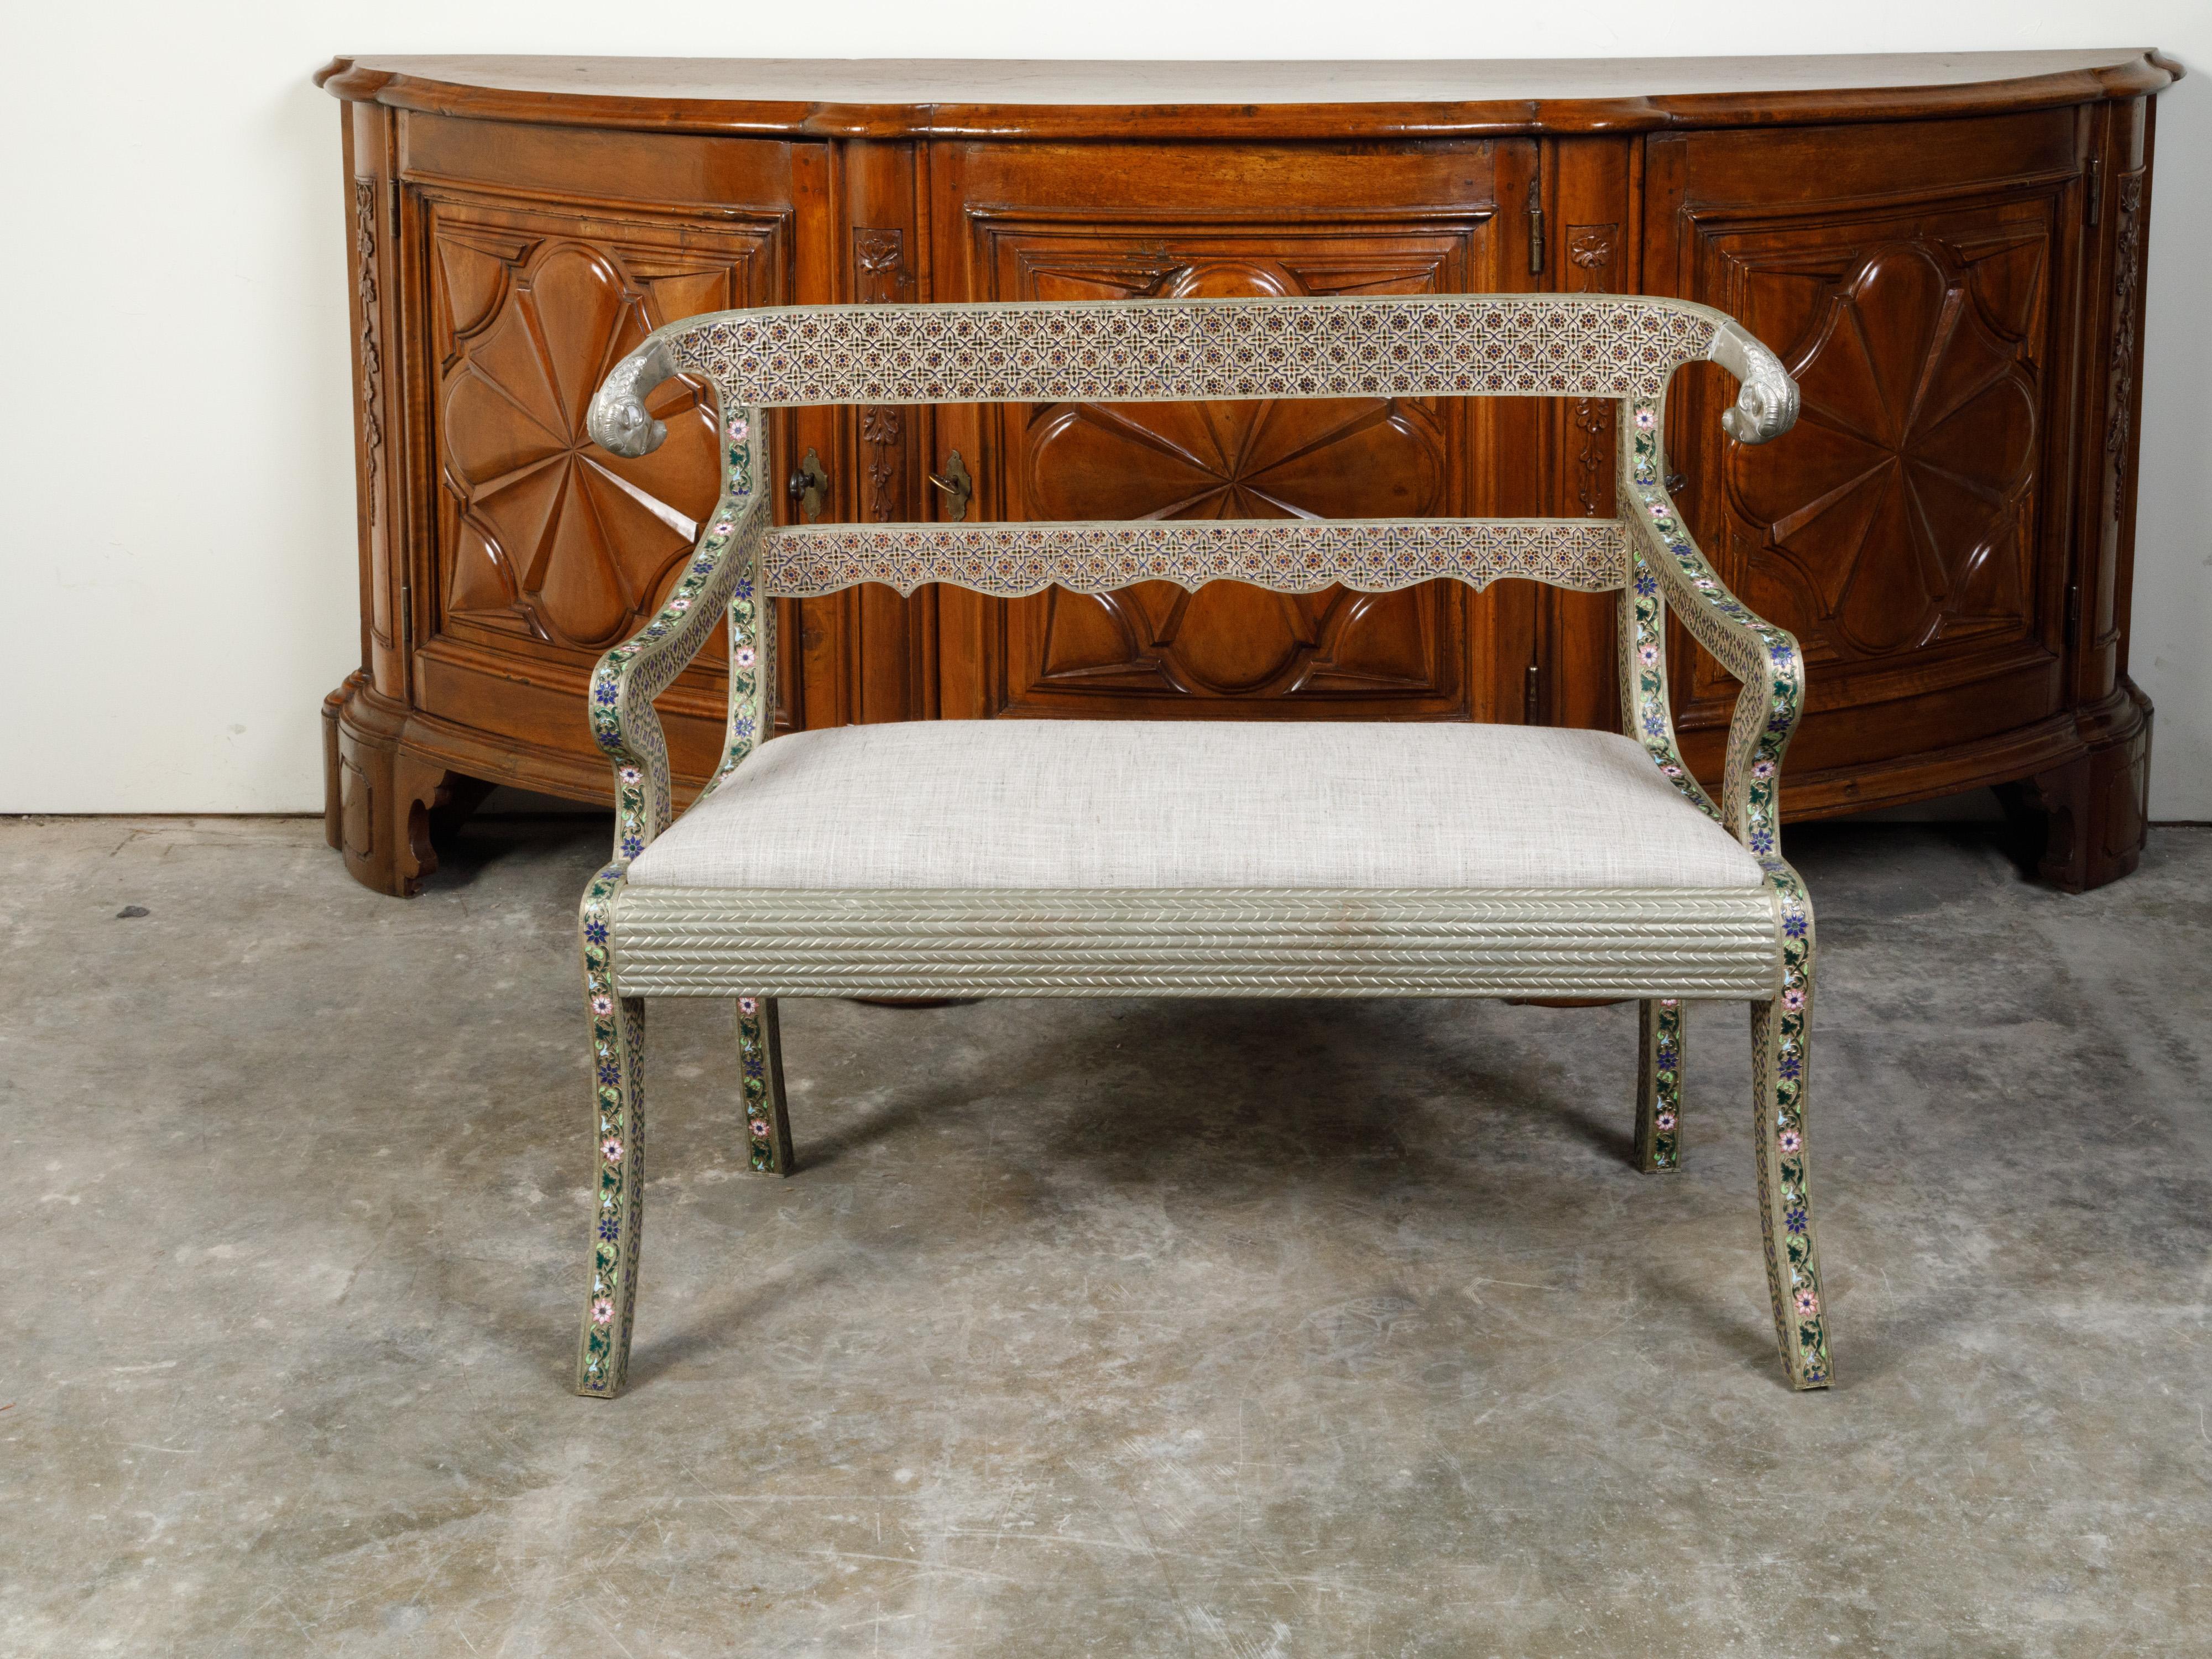 A Moroccan metal settee from the mid 20th century, with enamel décor and rams' heads. Created in Morocco during the second quarter of the 20th century, this settee features a pierced back accented with rams' heads and scalloped splat, connected to